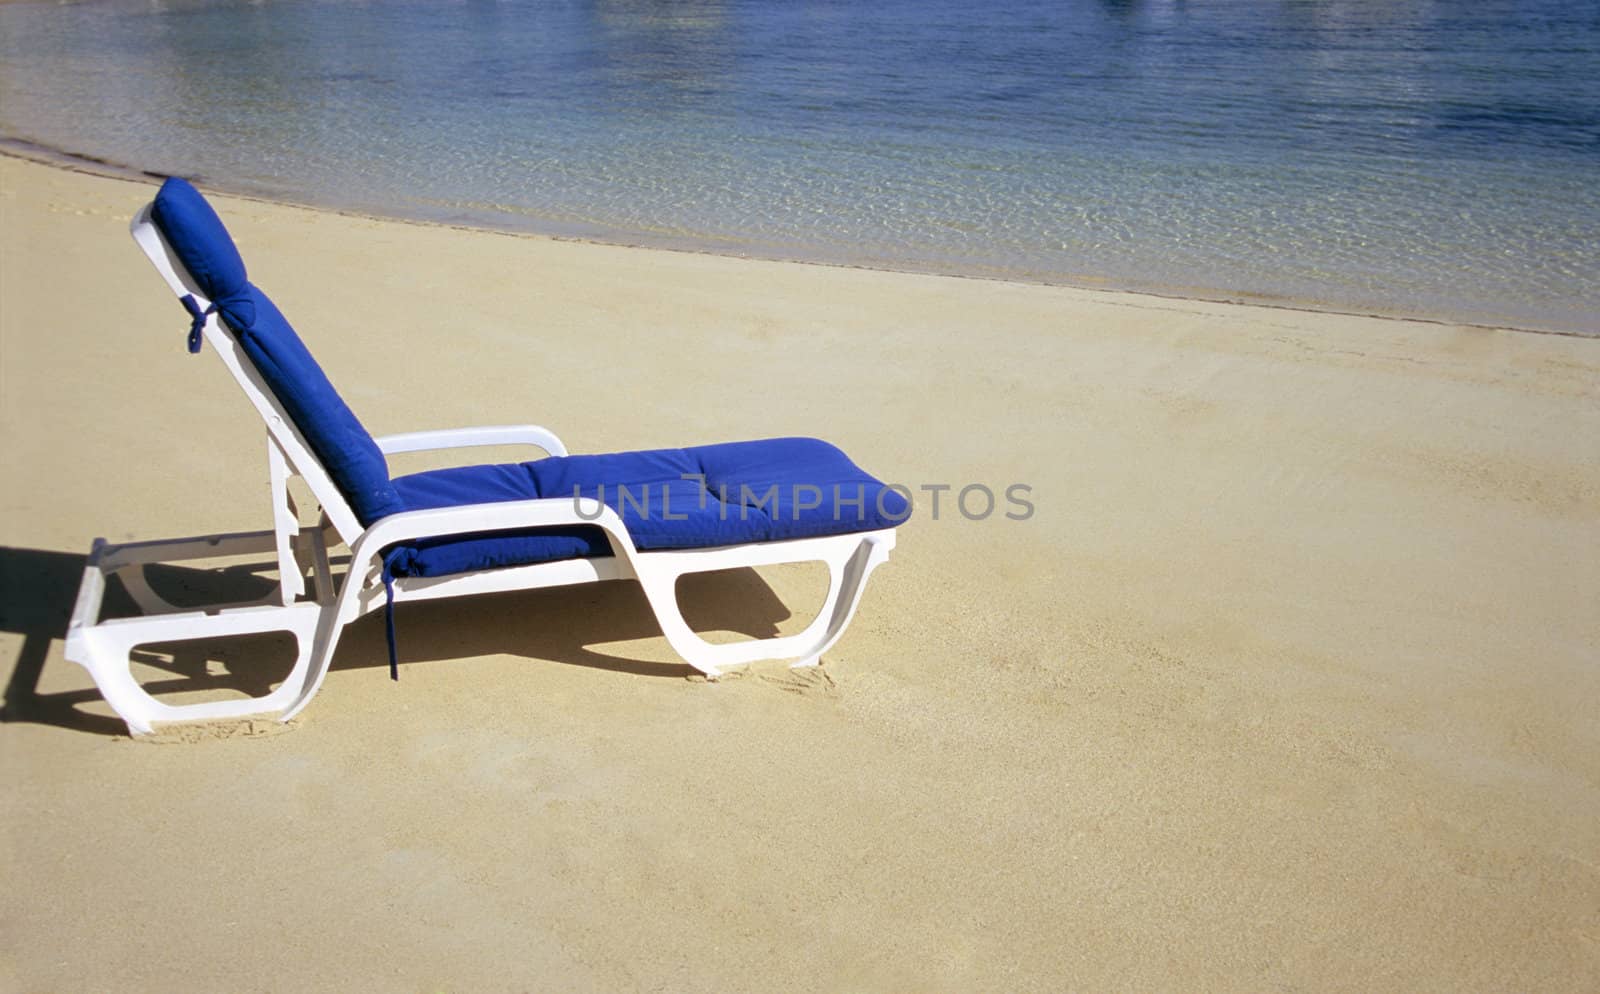 Inviting Deck Chair by ACMPhoto